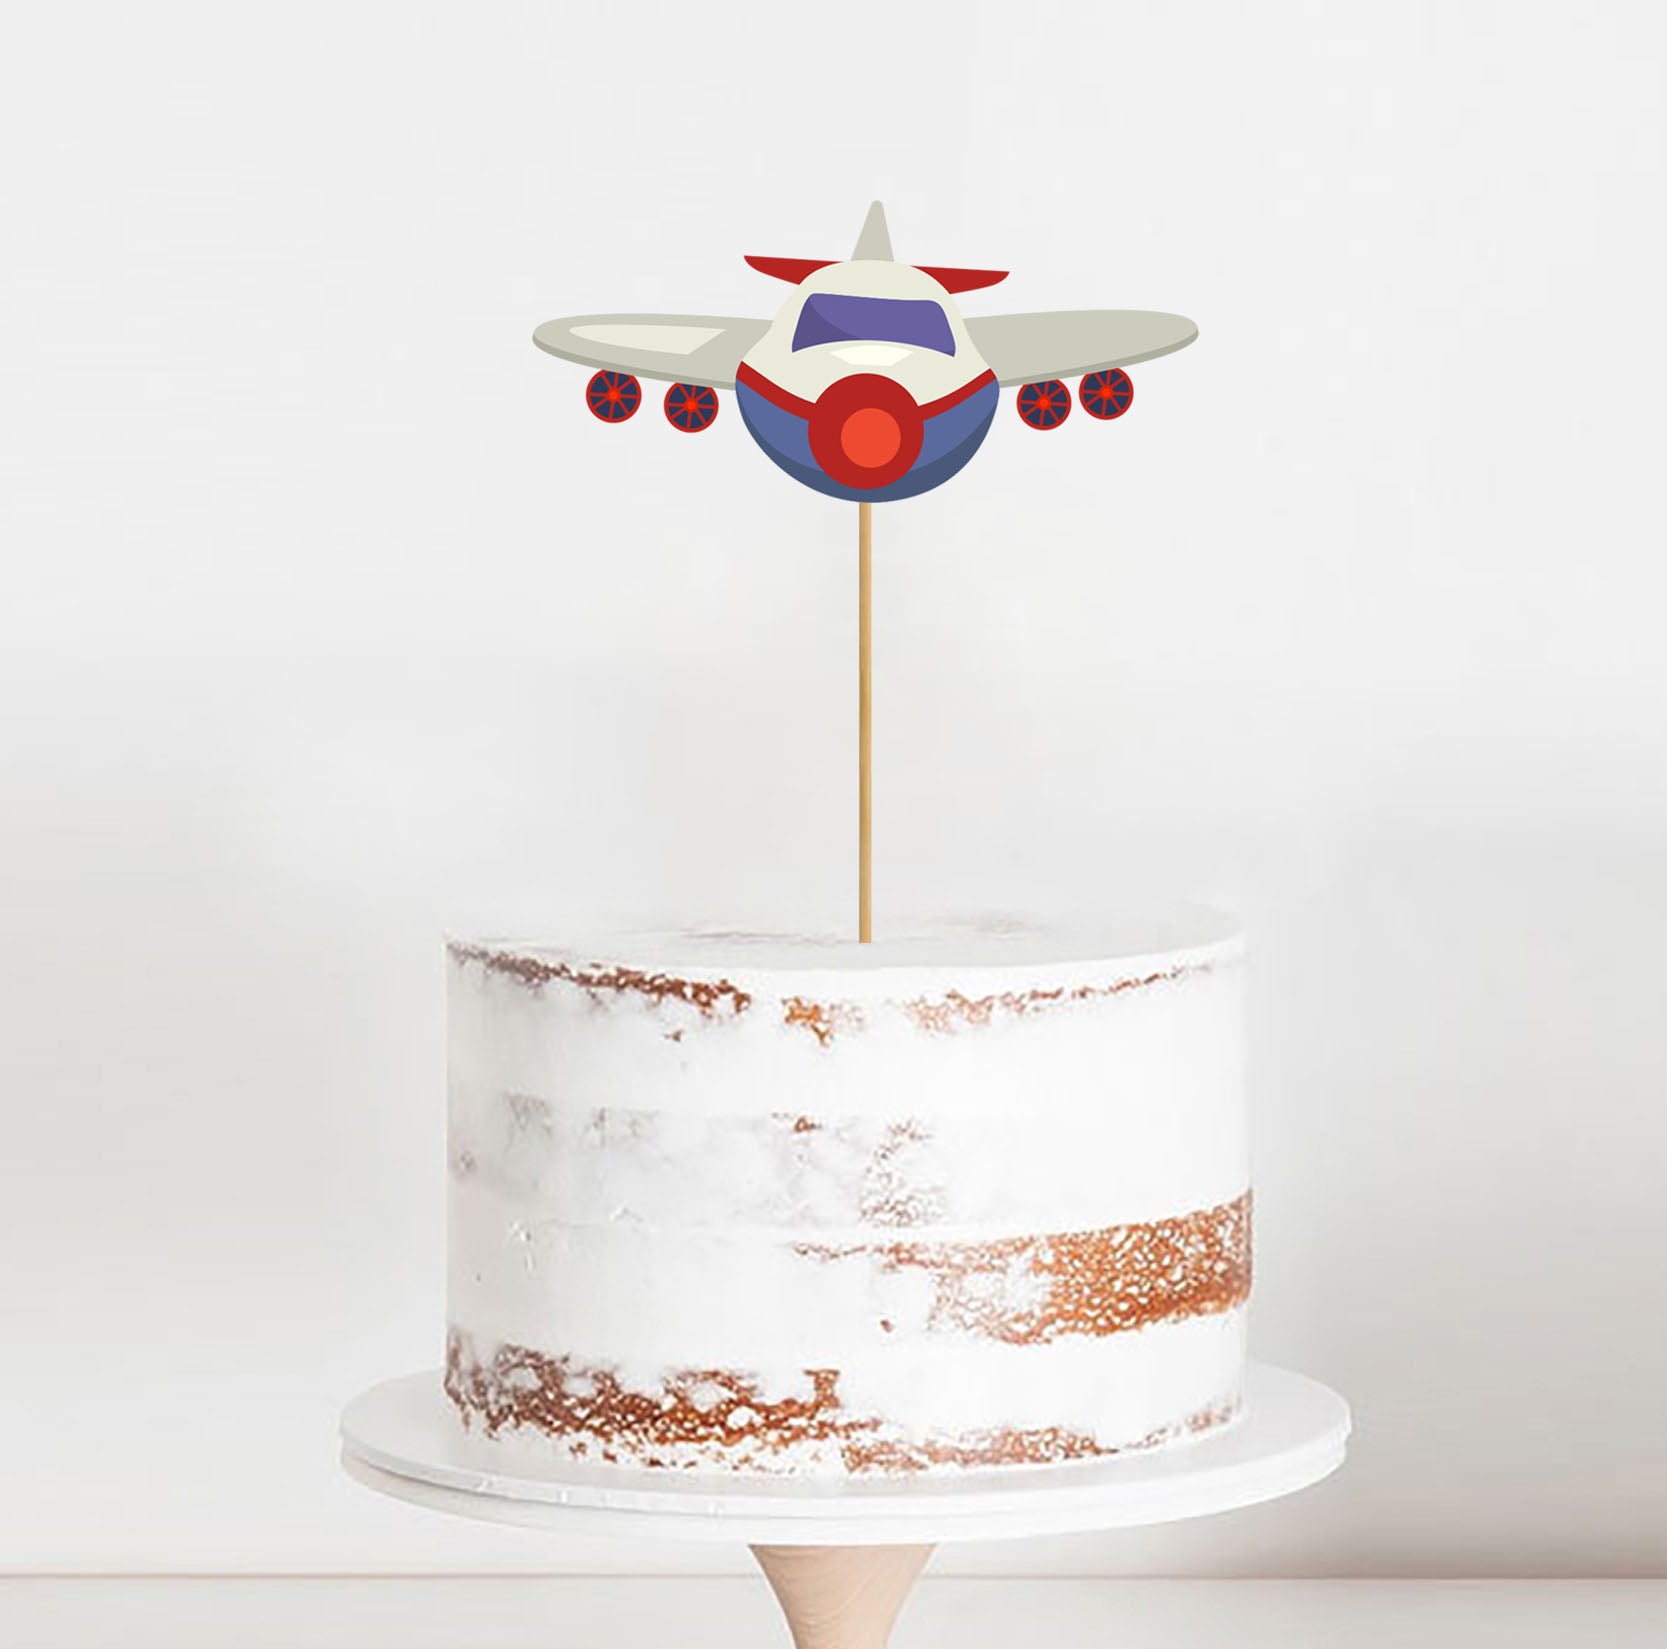 Personalised Plane Cake Topper - Plane with Name and Age Cake Decoration  ‚Äì Made in Australia